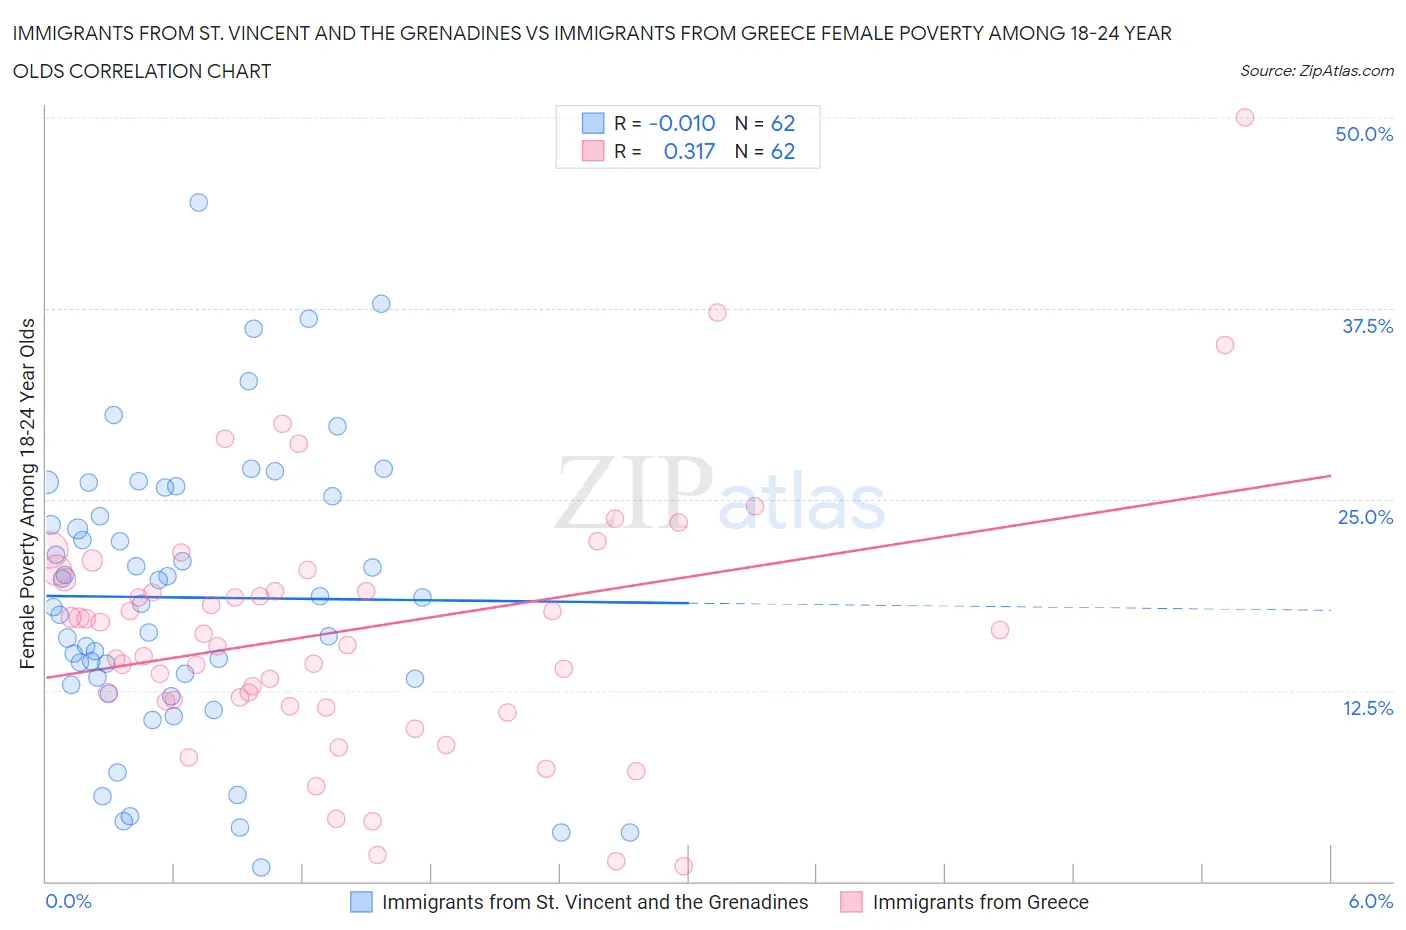 Immigrants from St. Vincent and the Grenadines vs Immigrants from Greece Female Poverty Among 18-24 Year Olds